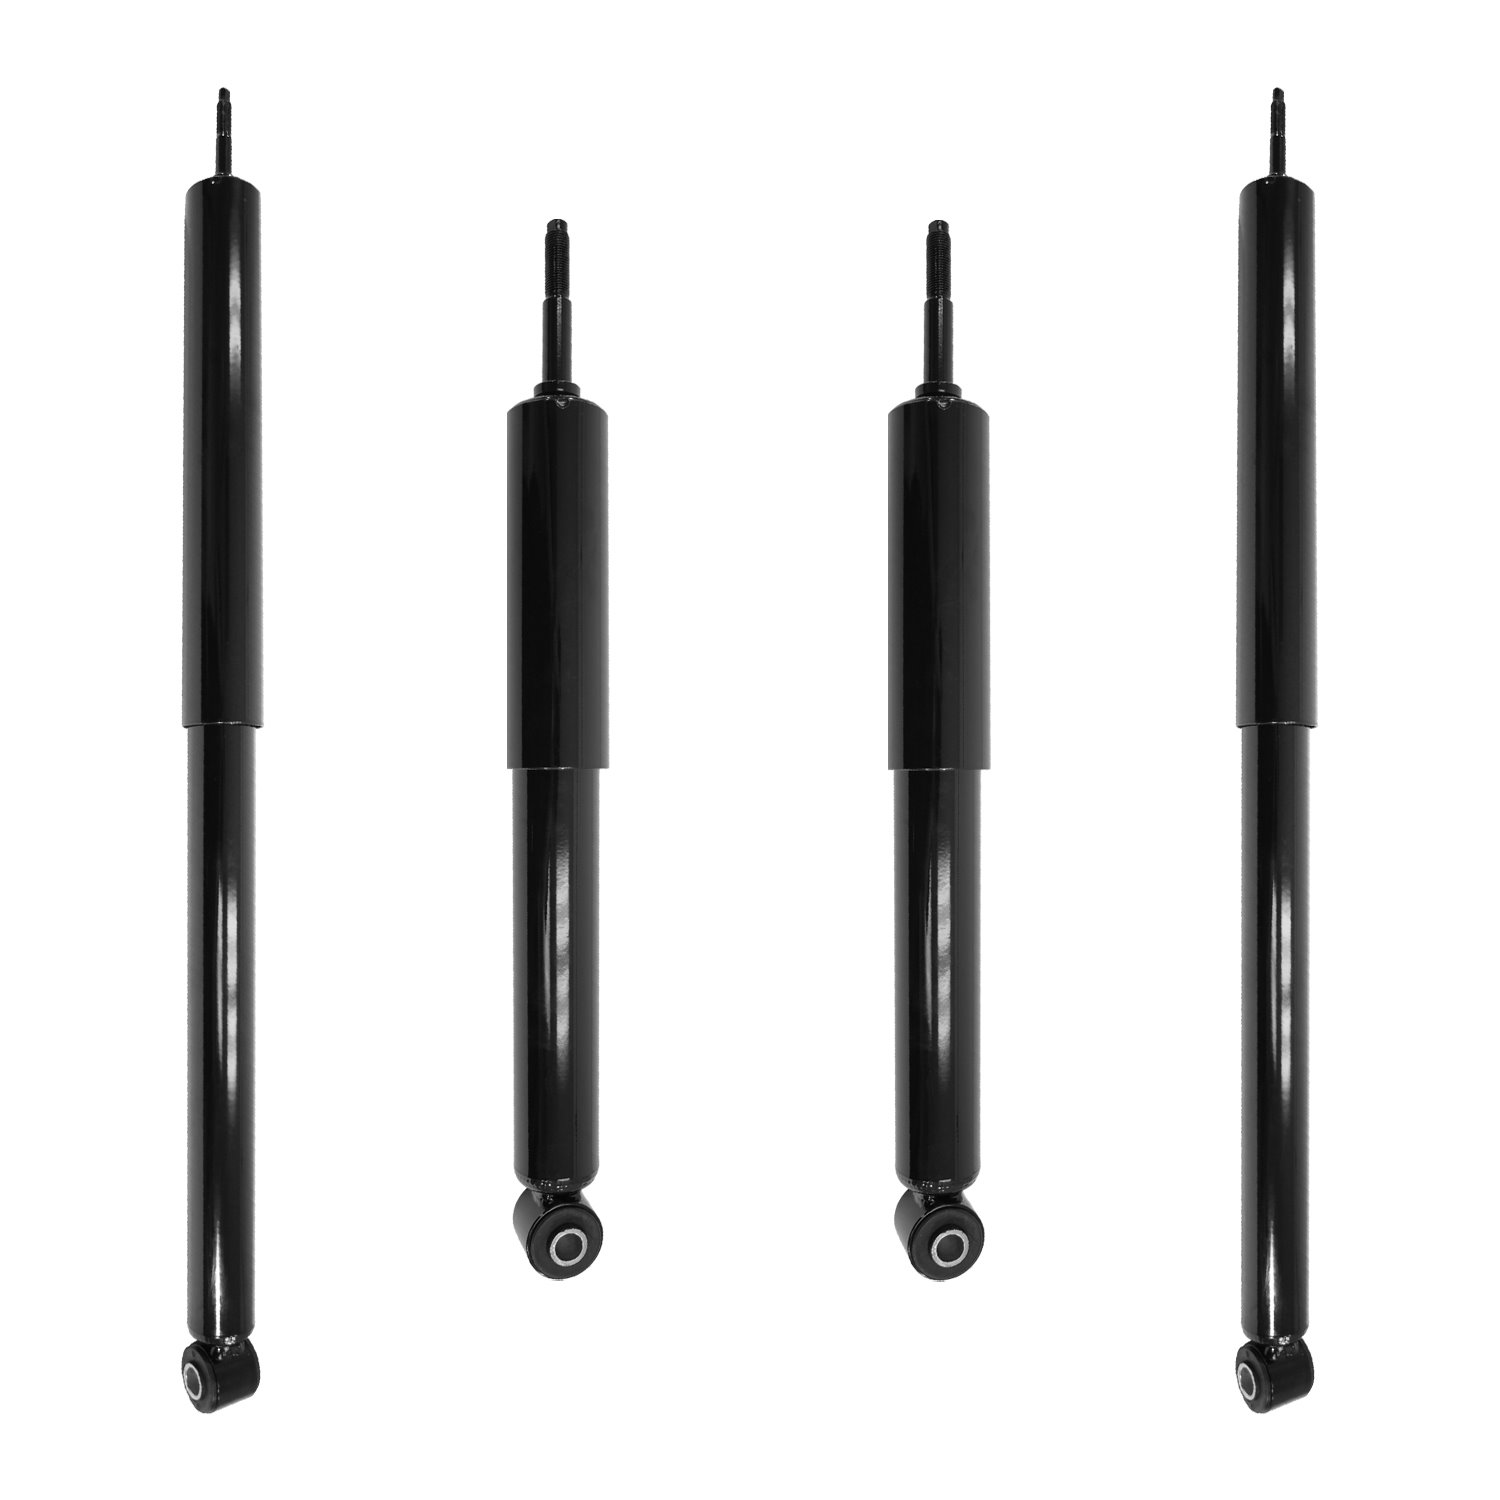 4-212080-252180-001 Front & Rear Nitrogen Gas Shock Absorber Kit Fits Select Ford F-150 Heritage, Ford F-150, Ford F-250